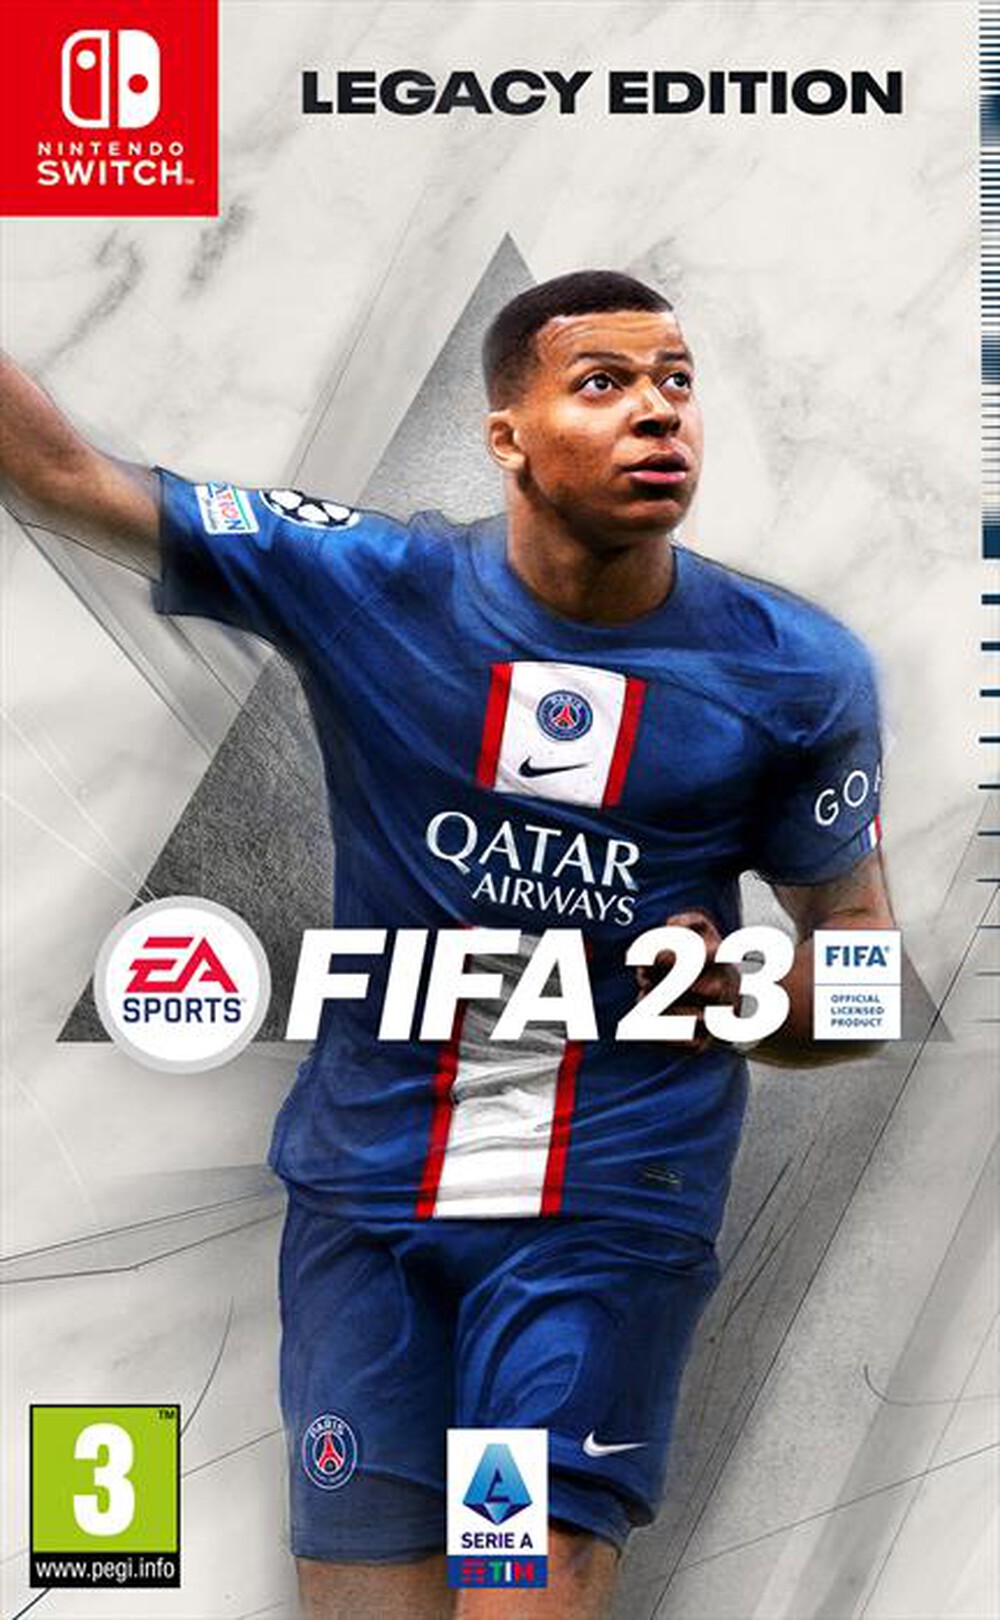 "ELECTRONIC ARTS - FIFA 23 LEGACY EDITION SWITCH"